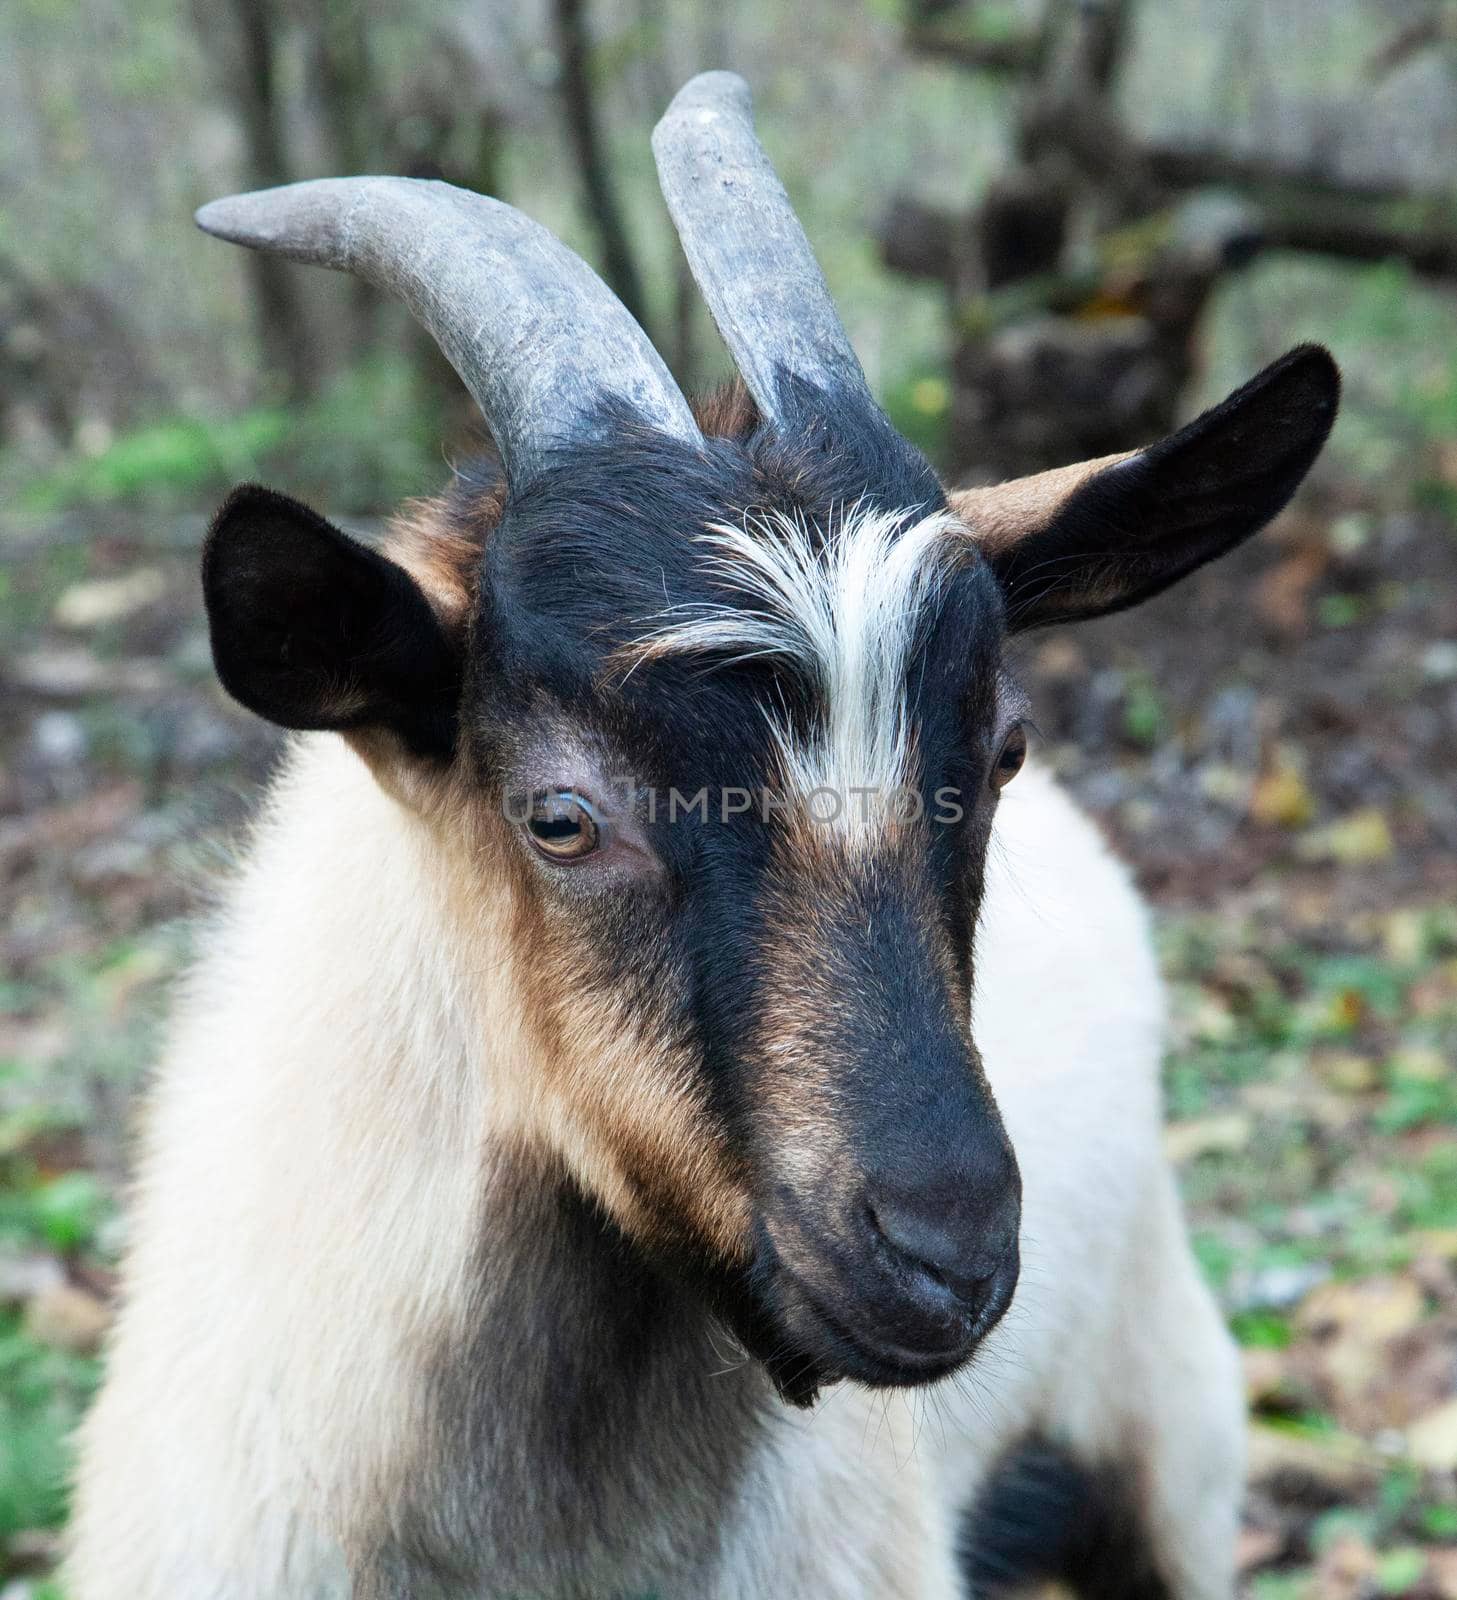 Goat. Portrait of a goat on a farm in the village. Beautiful goat posing.